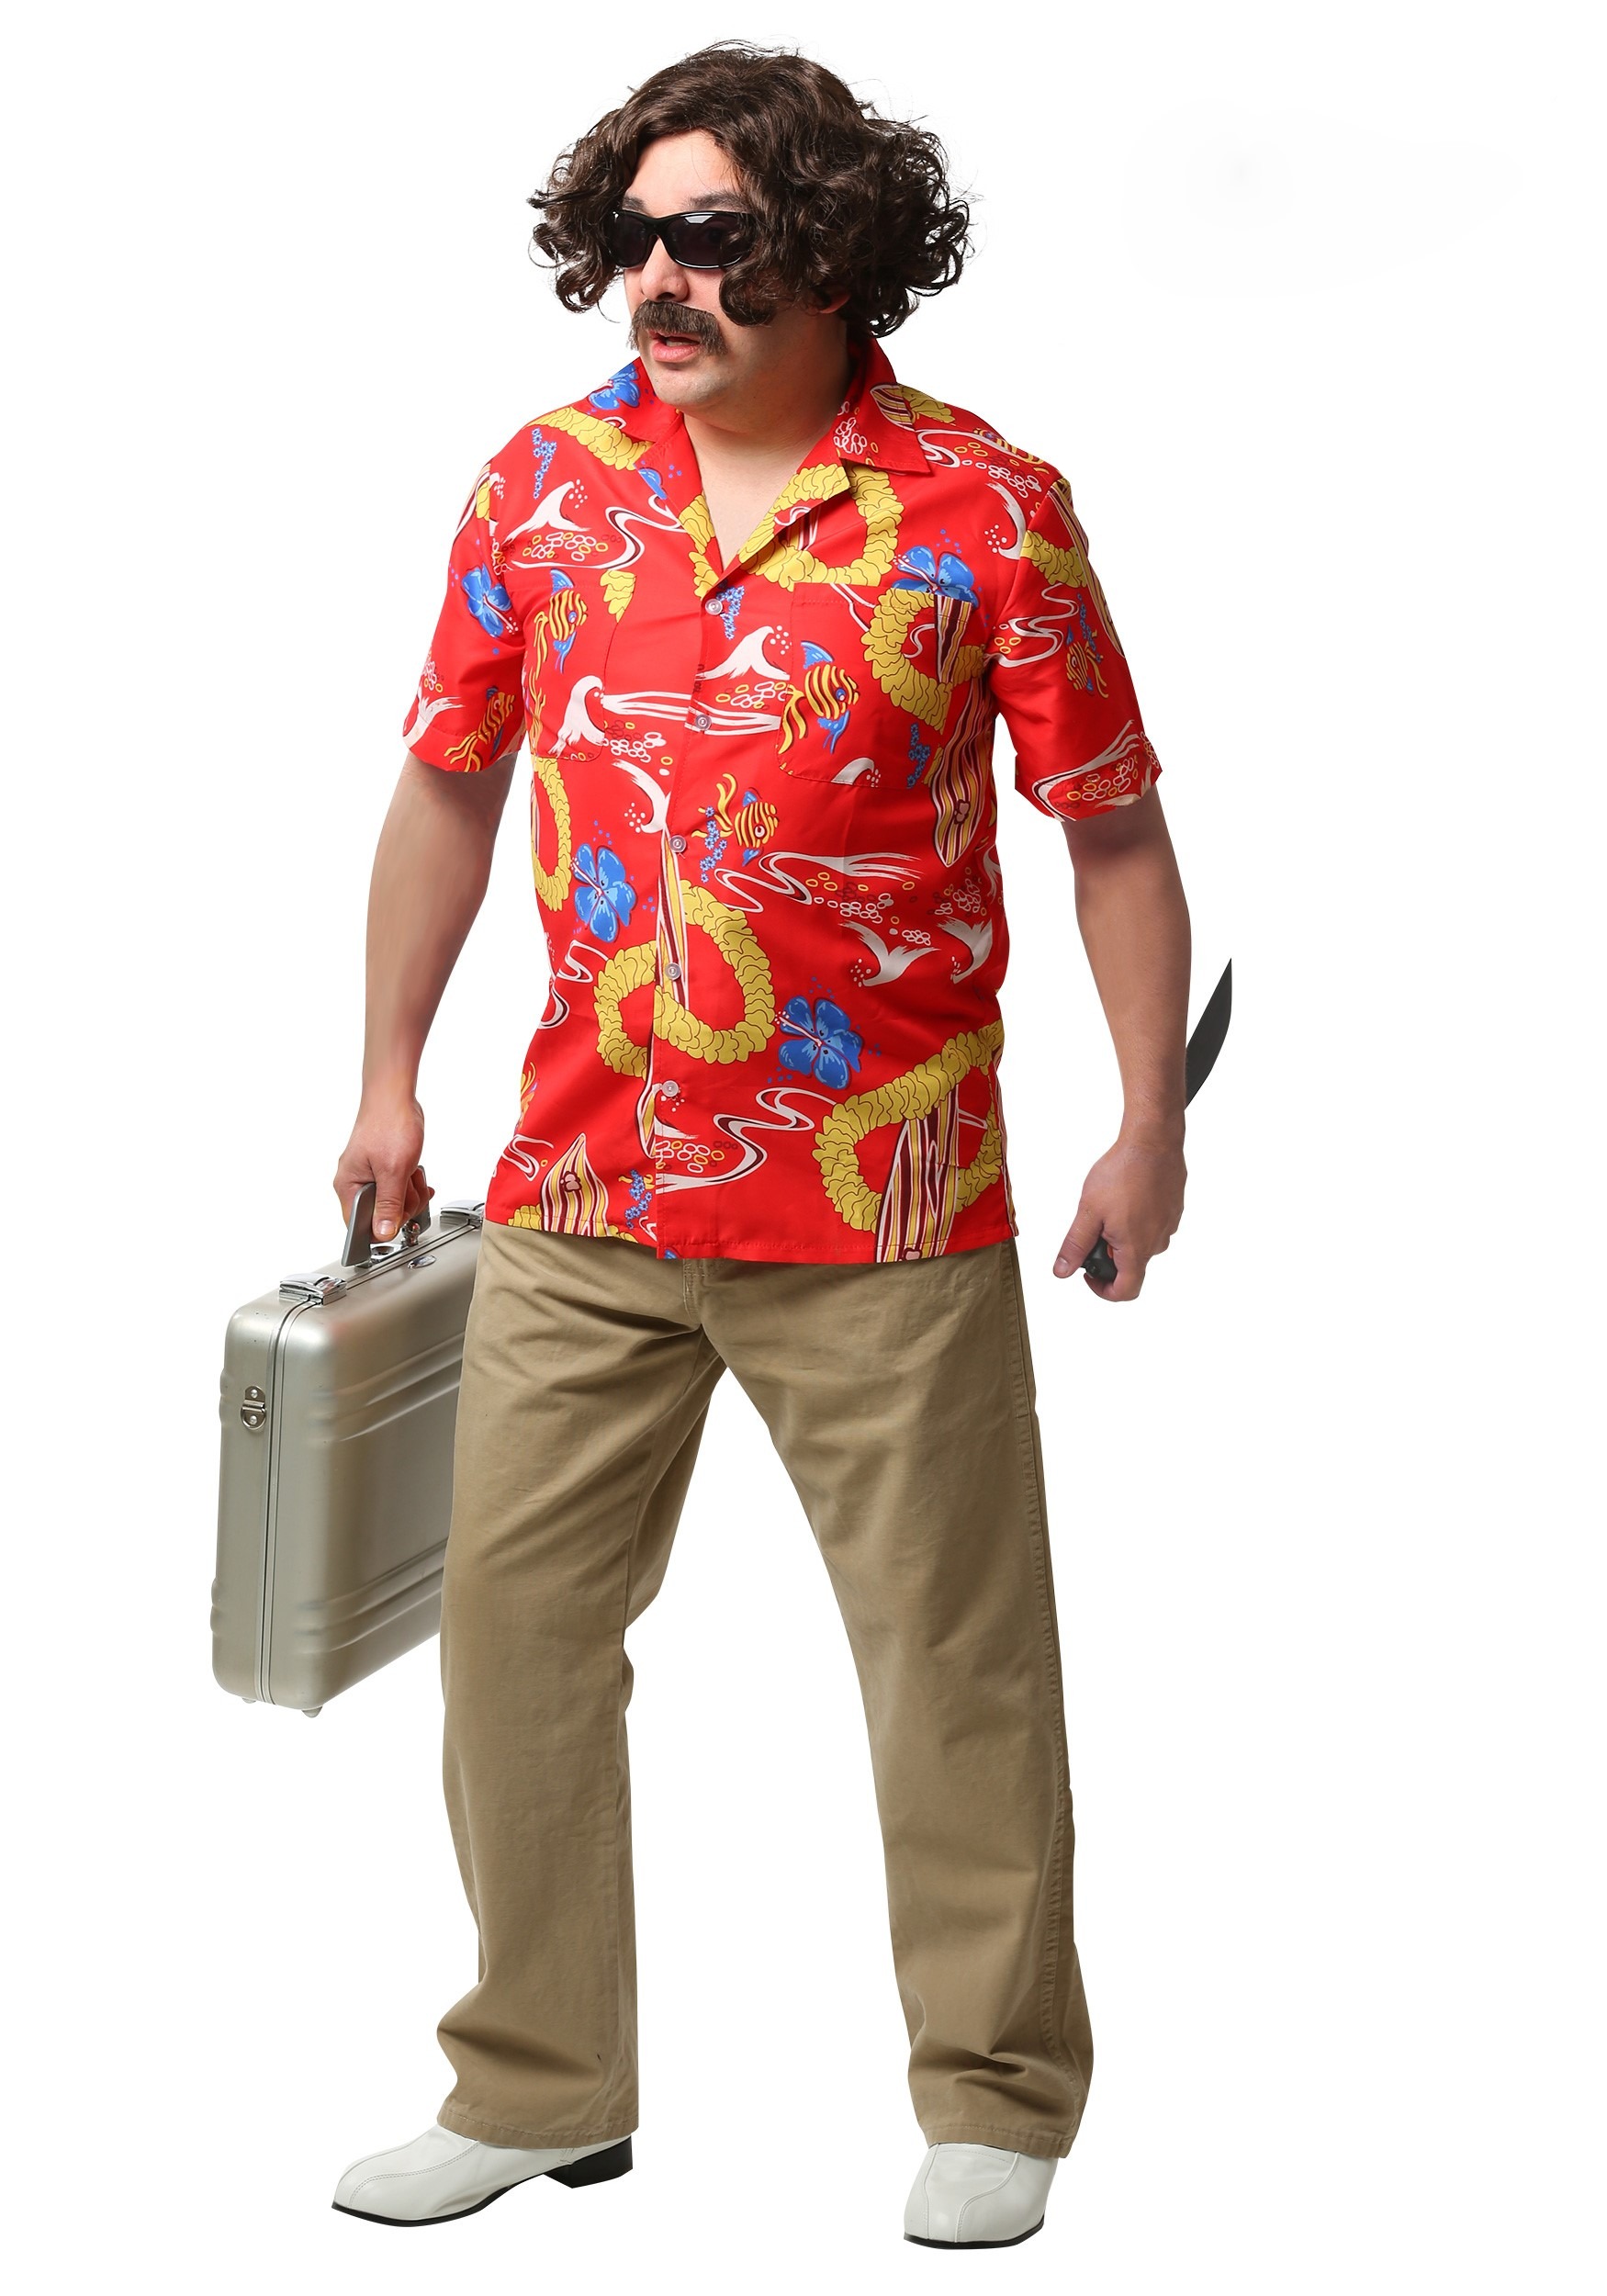 Fear and Loathing In Las Vegas Dr. Gonzo Adult Costume